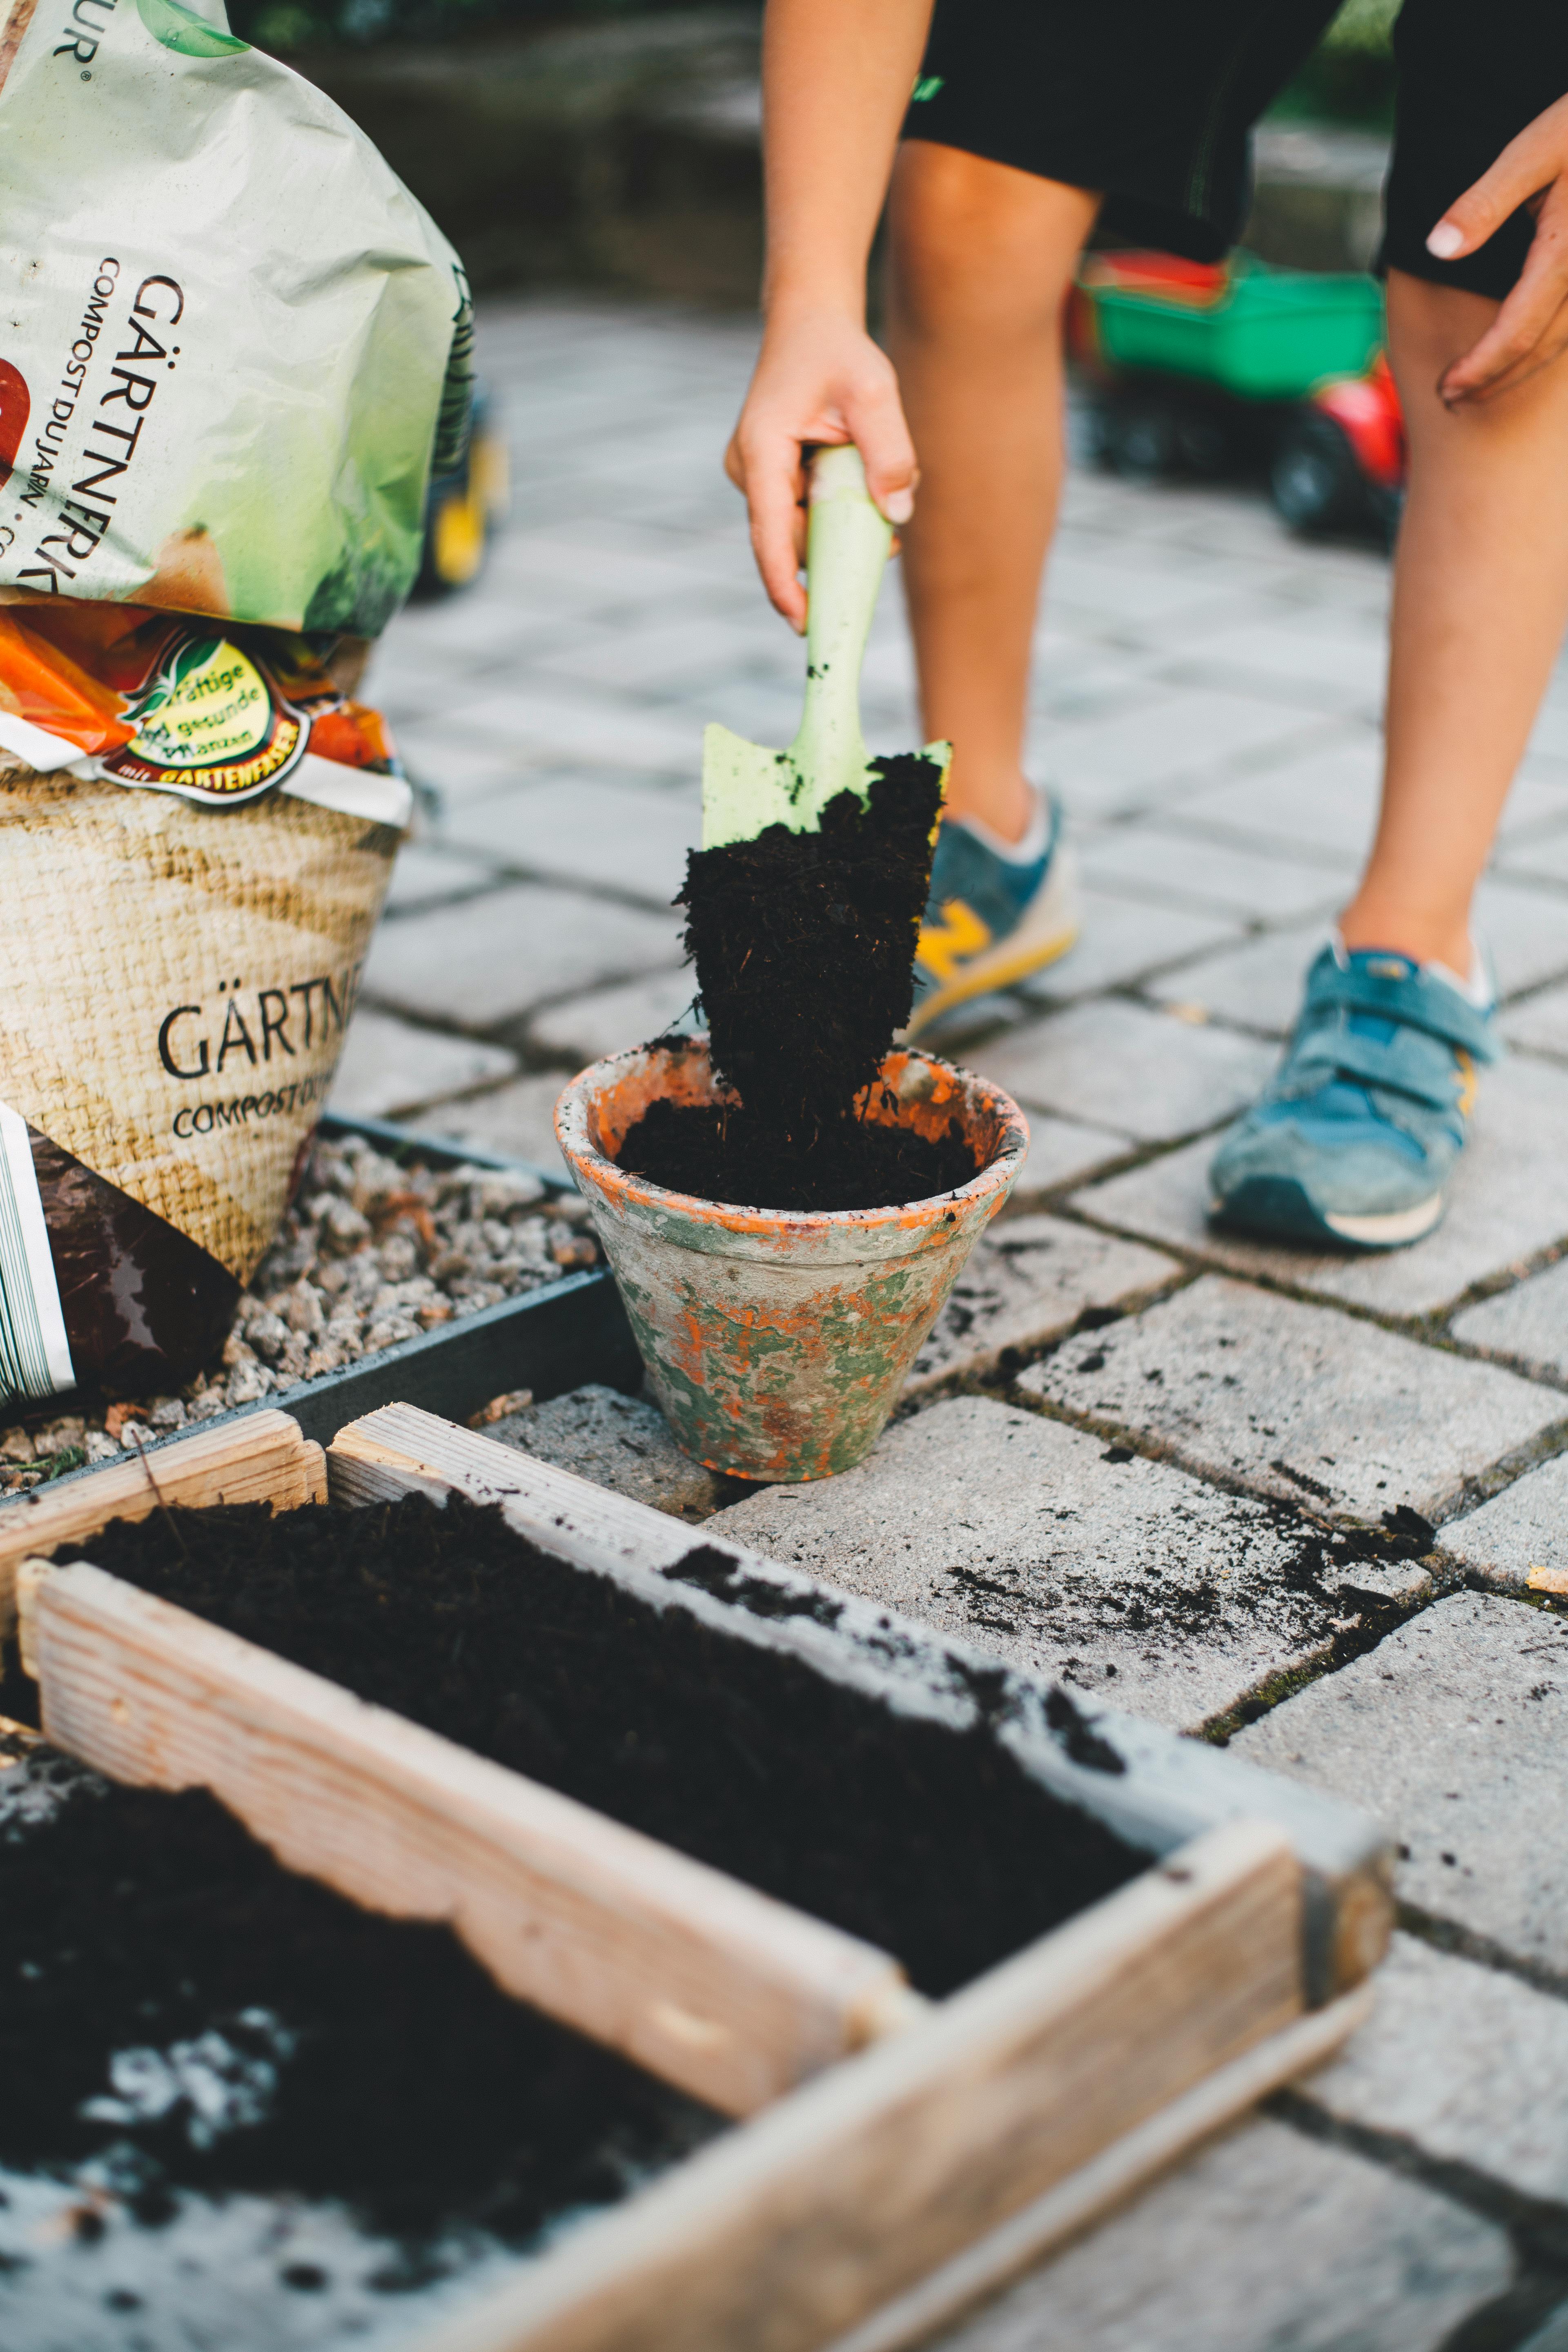 How Can I Grow A Thriving Vegetable Garden In Pots?